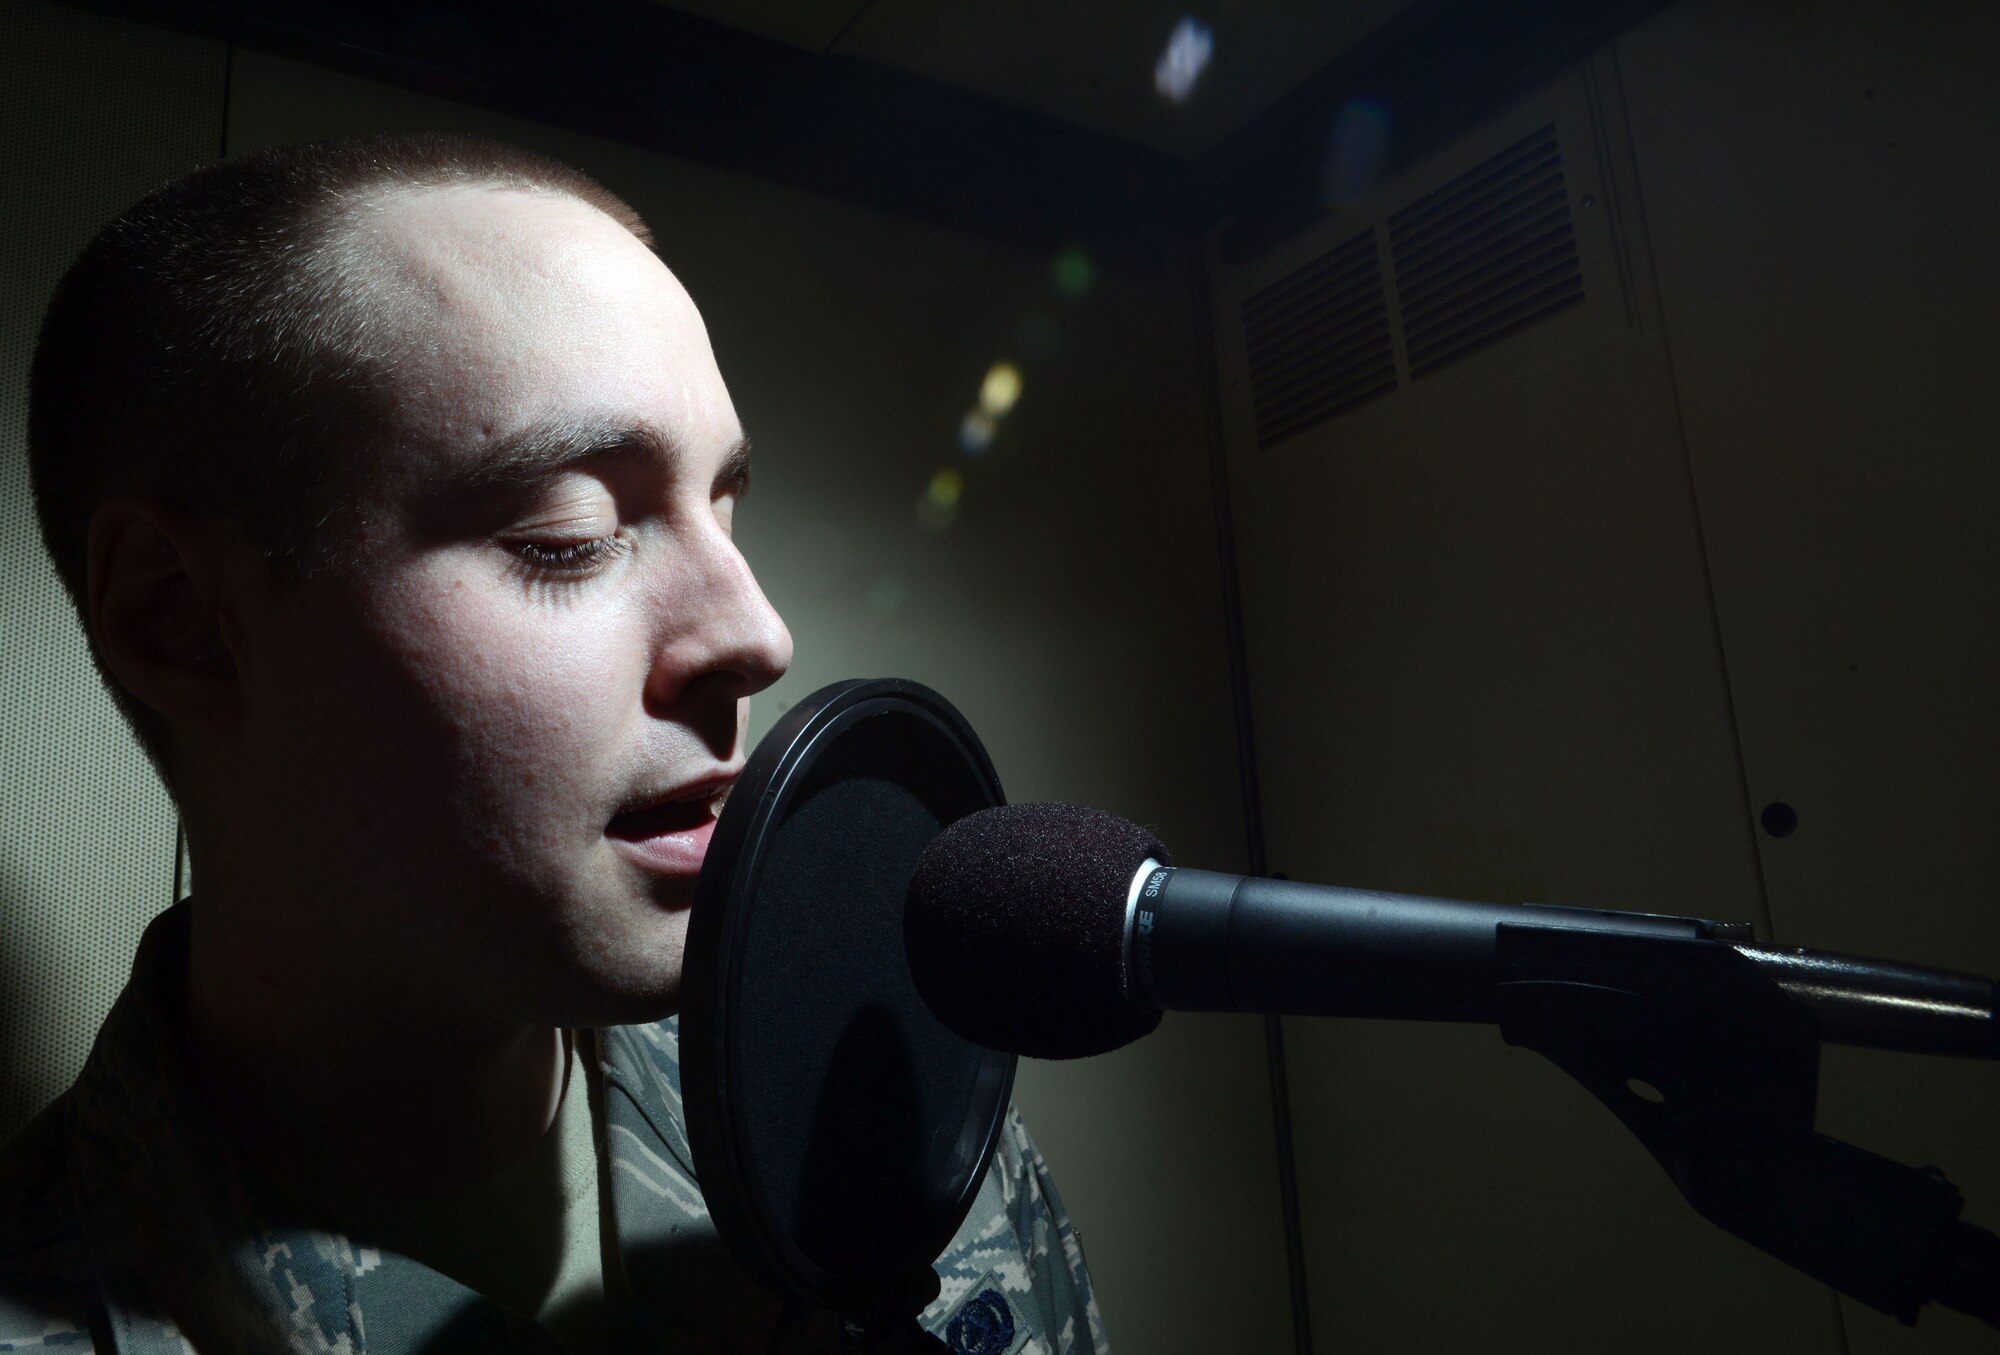 Airman 1st Class Alexander Ross, 673rd Logistic Readiness Squadron fuels technician, sings inside a sound booth at Joint Base Elmendorf-Richardson, Alaska, March 7, 2014. Ross was recently notified of his selection to be part of the 2014 Tops in Blue tour after only 11 months in the Air Force. (U.S. Air Force photo/Staff Sgt. Sheila deVera)


